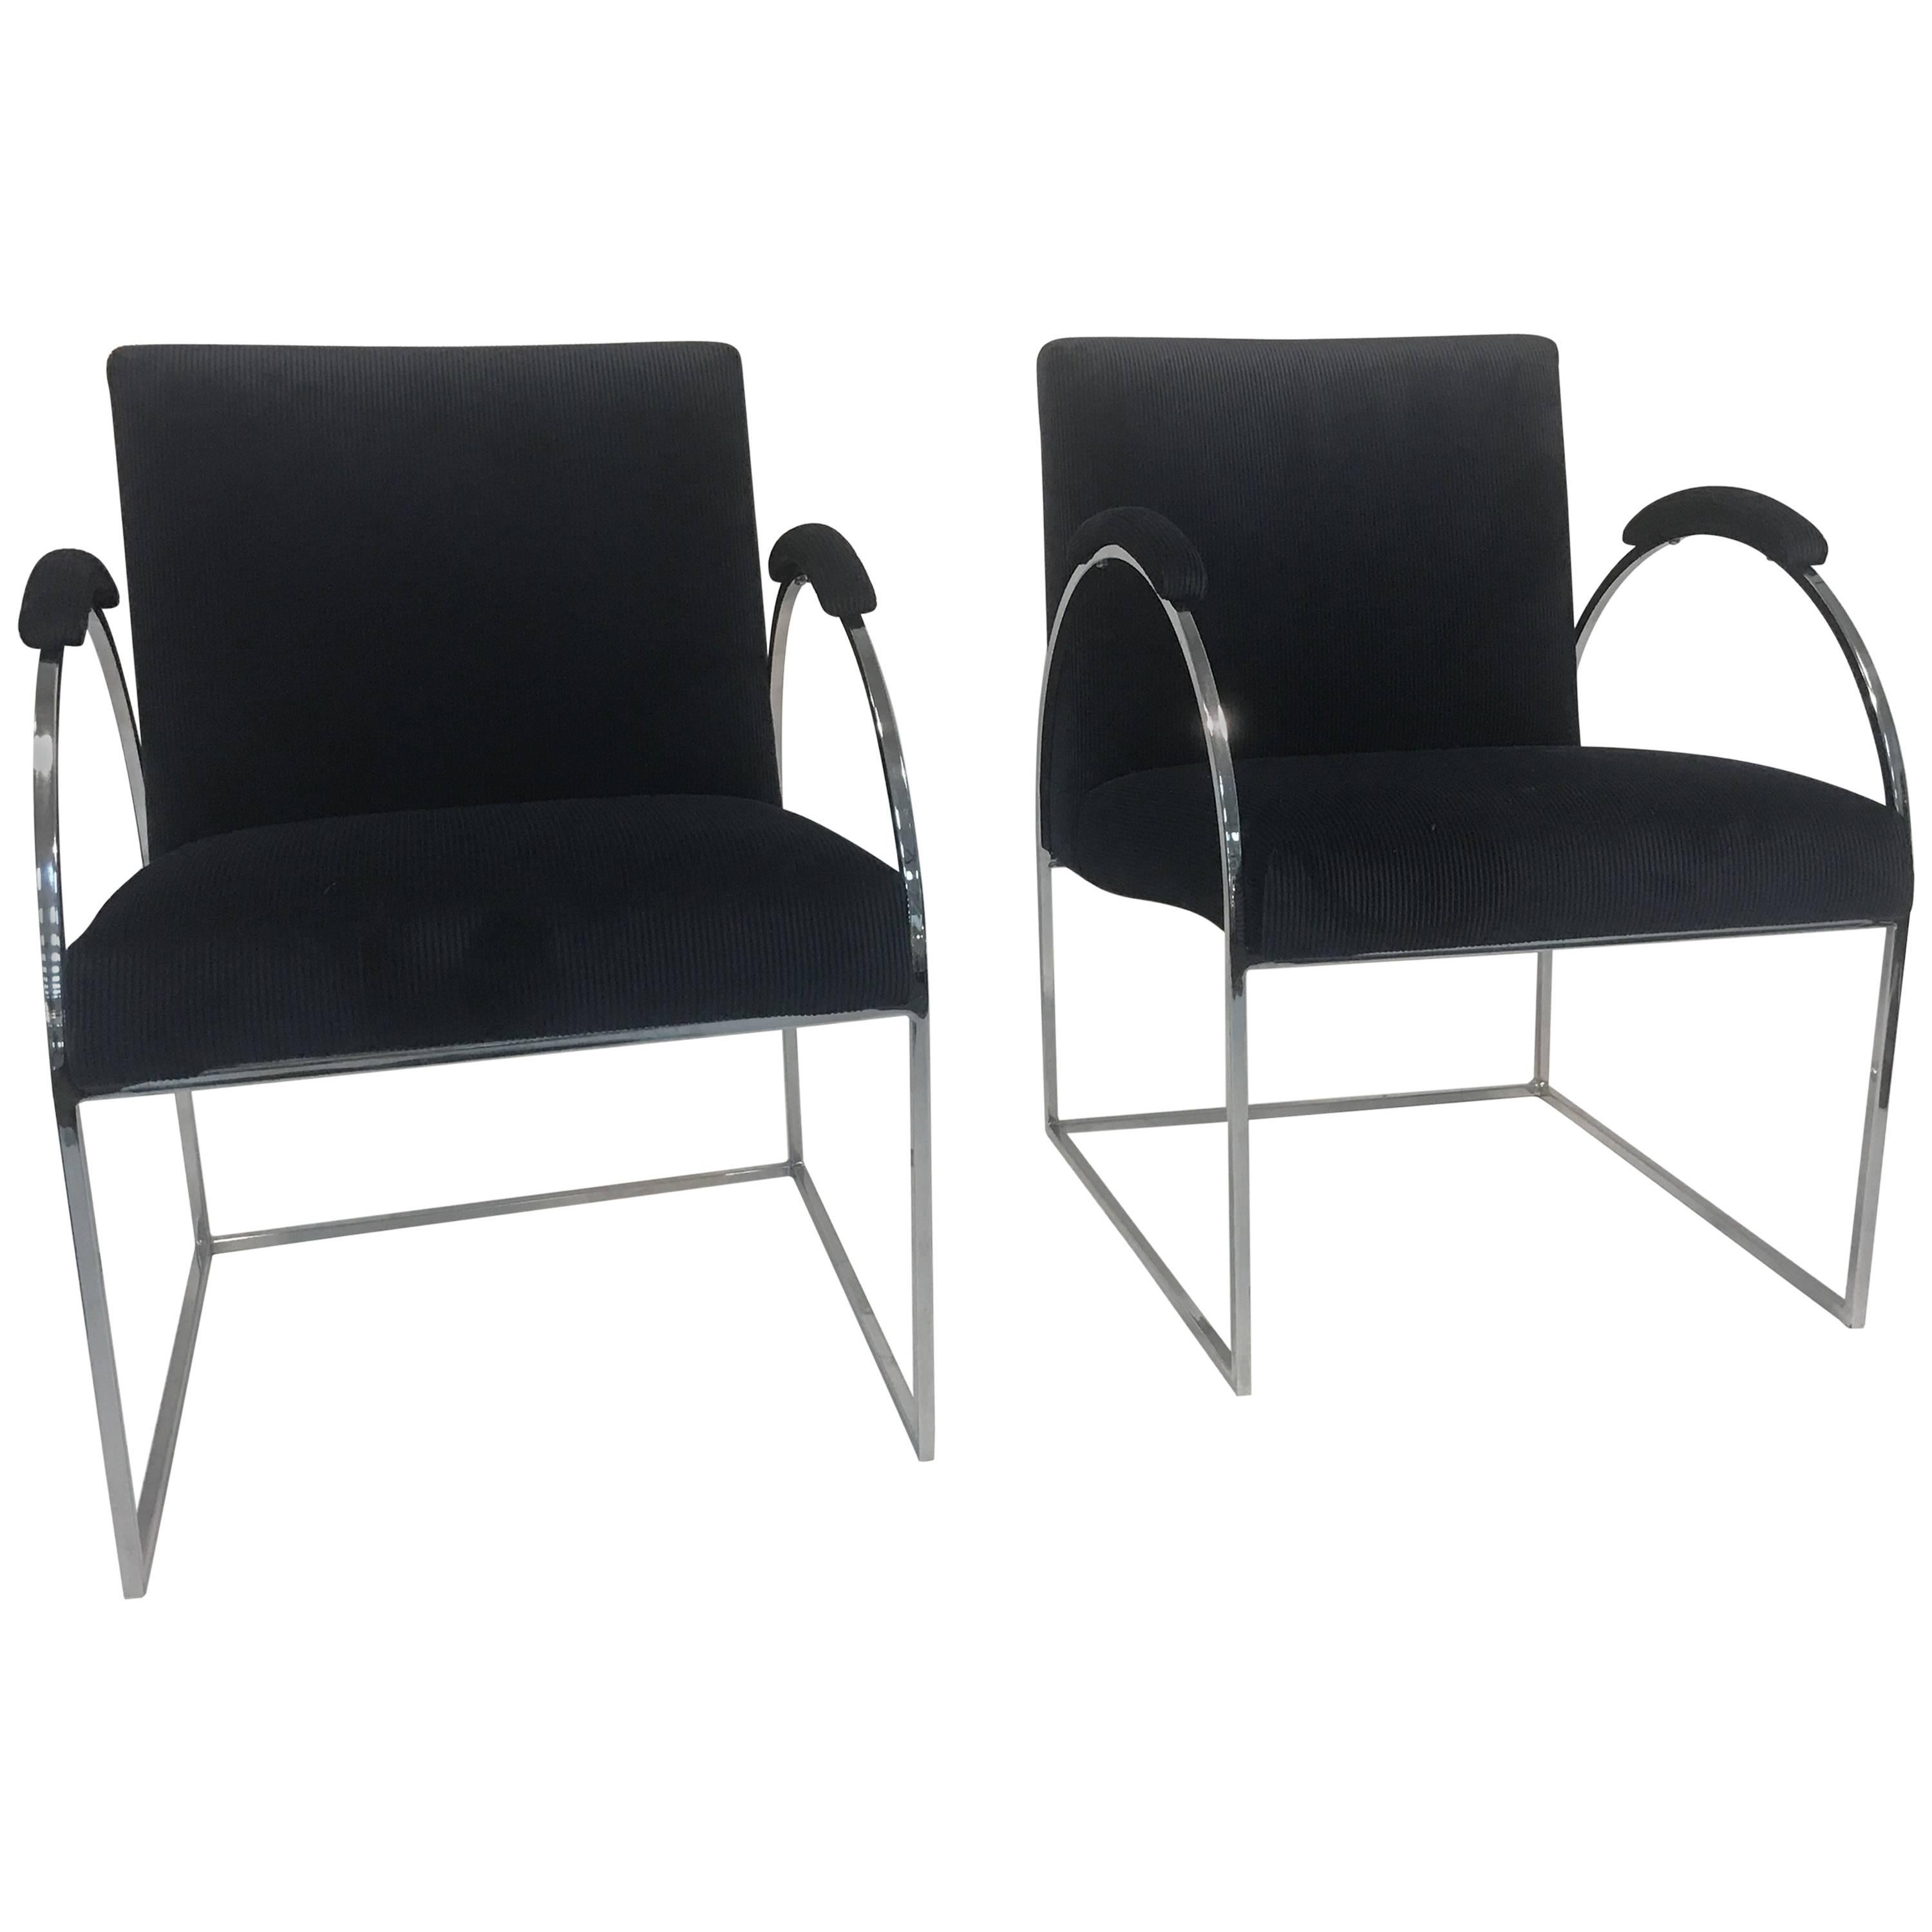 Fabulous Pair of Chrome Chairs by Milo Baughman in Rich Velvet Fabric For Sale